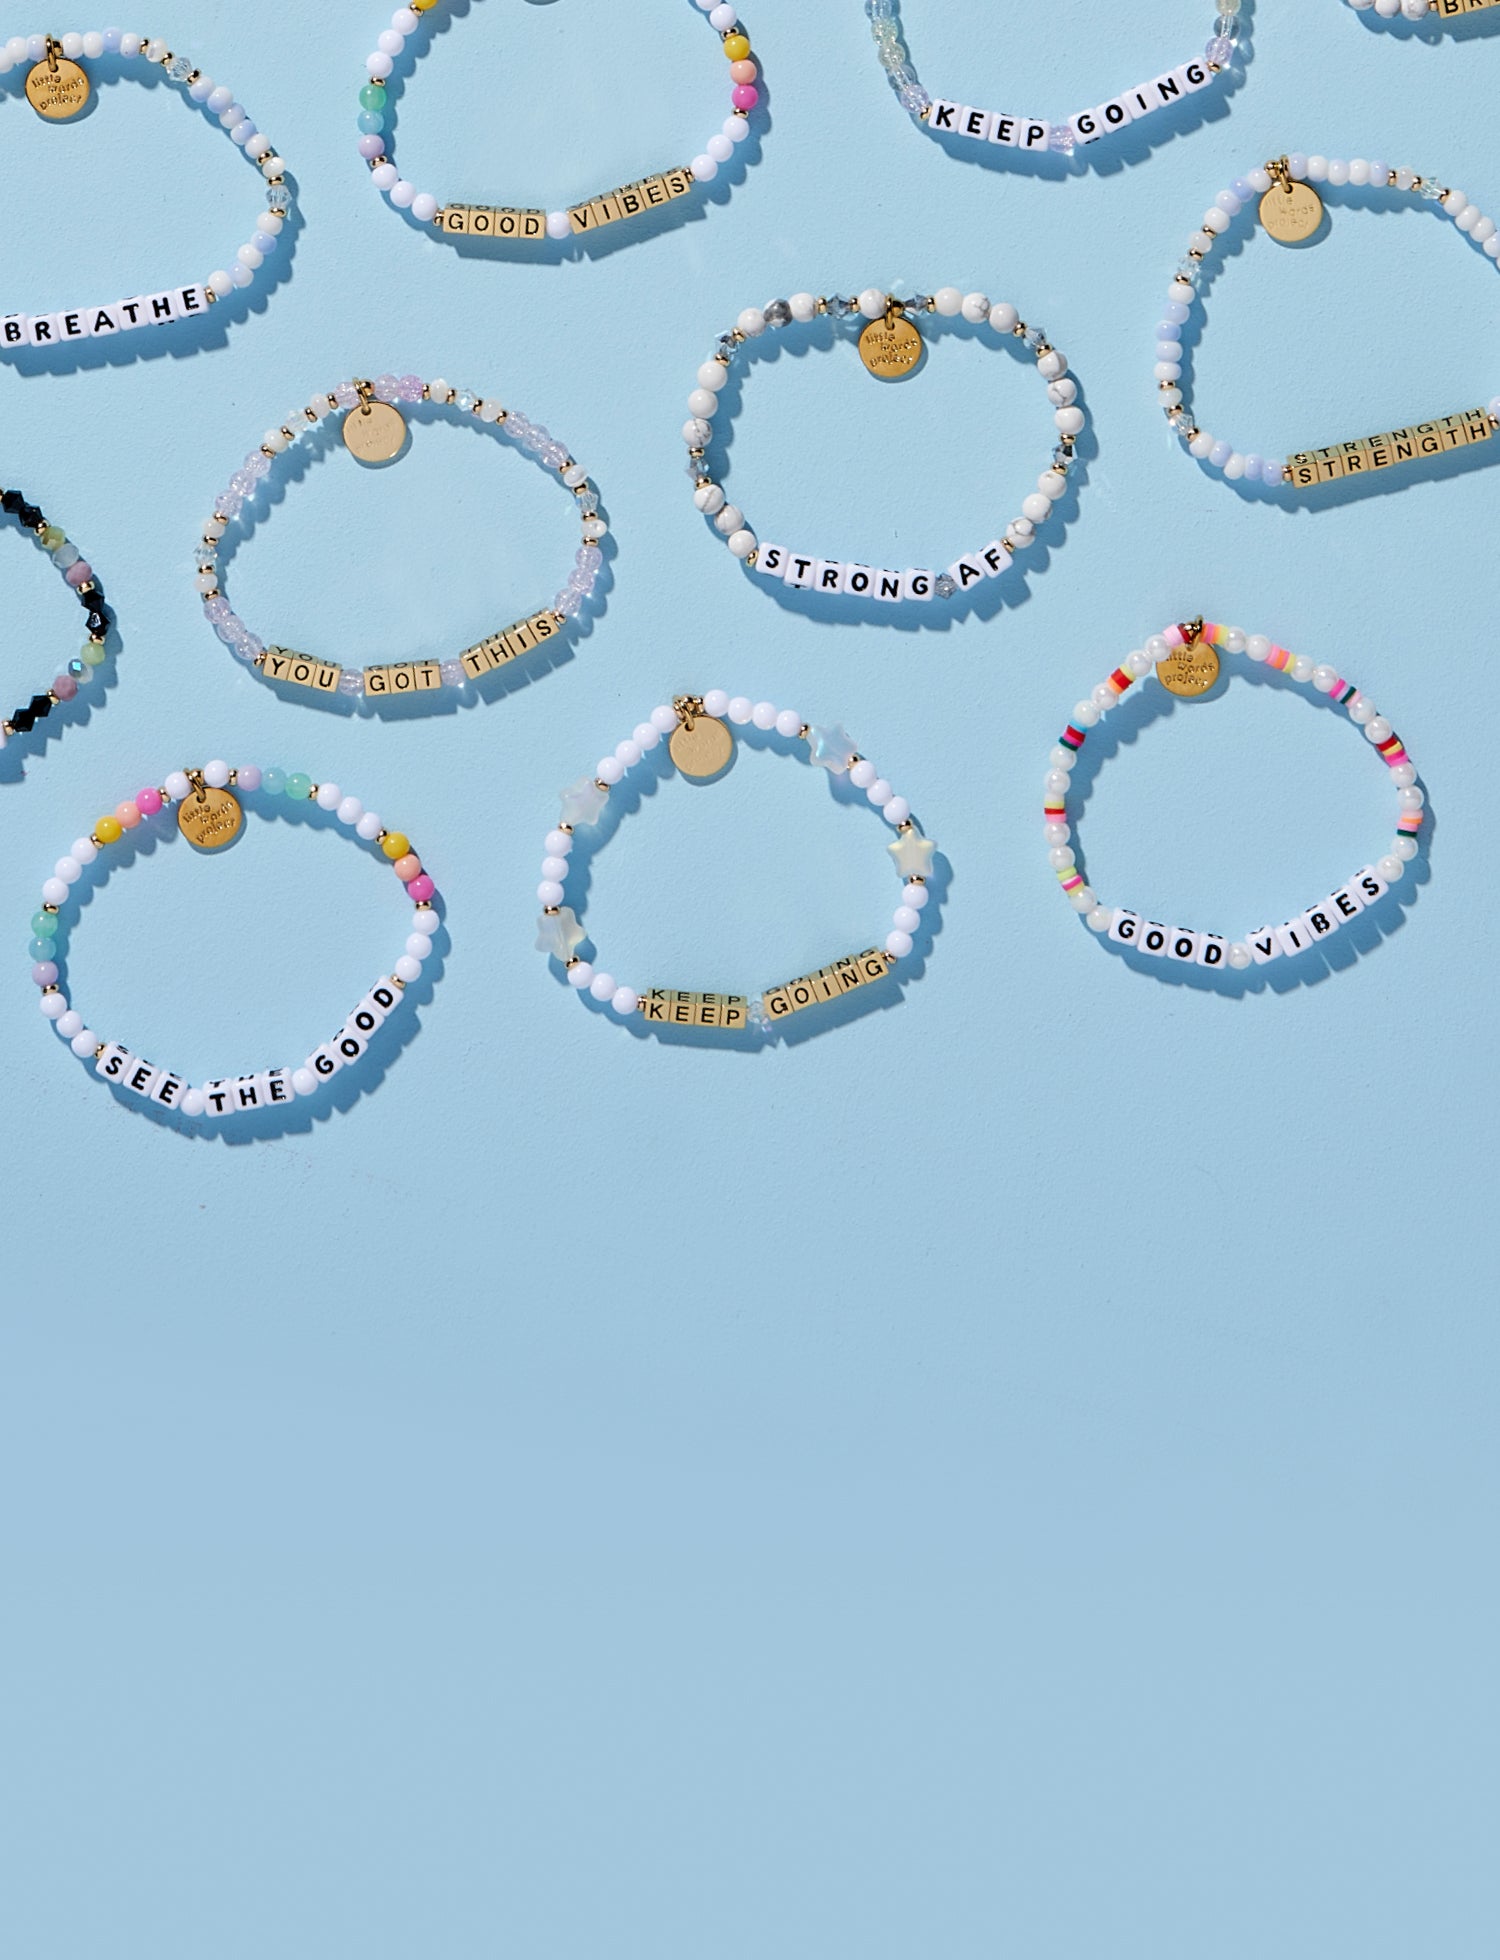 22 Clay Beads Bracelet Ideas Royalty-Free Photos and Stock Images |  Shutterstock